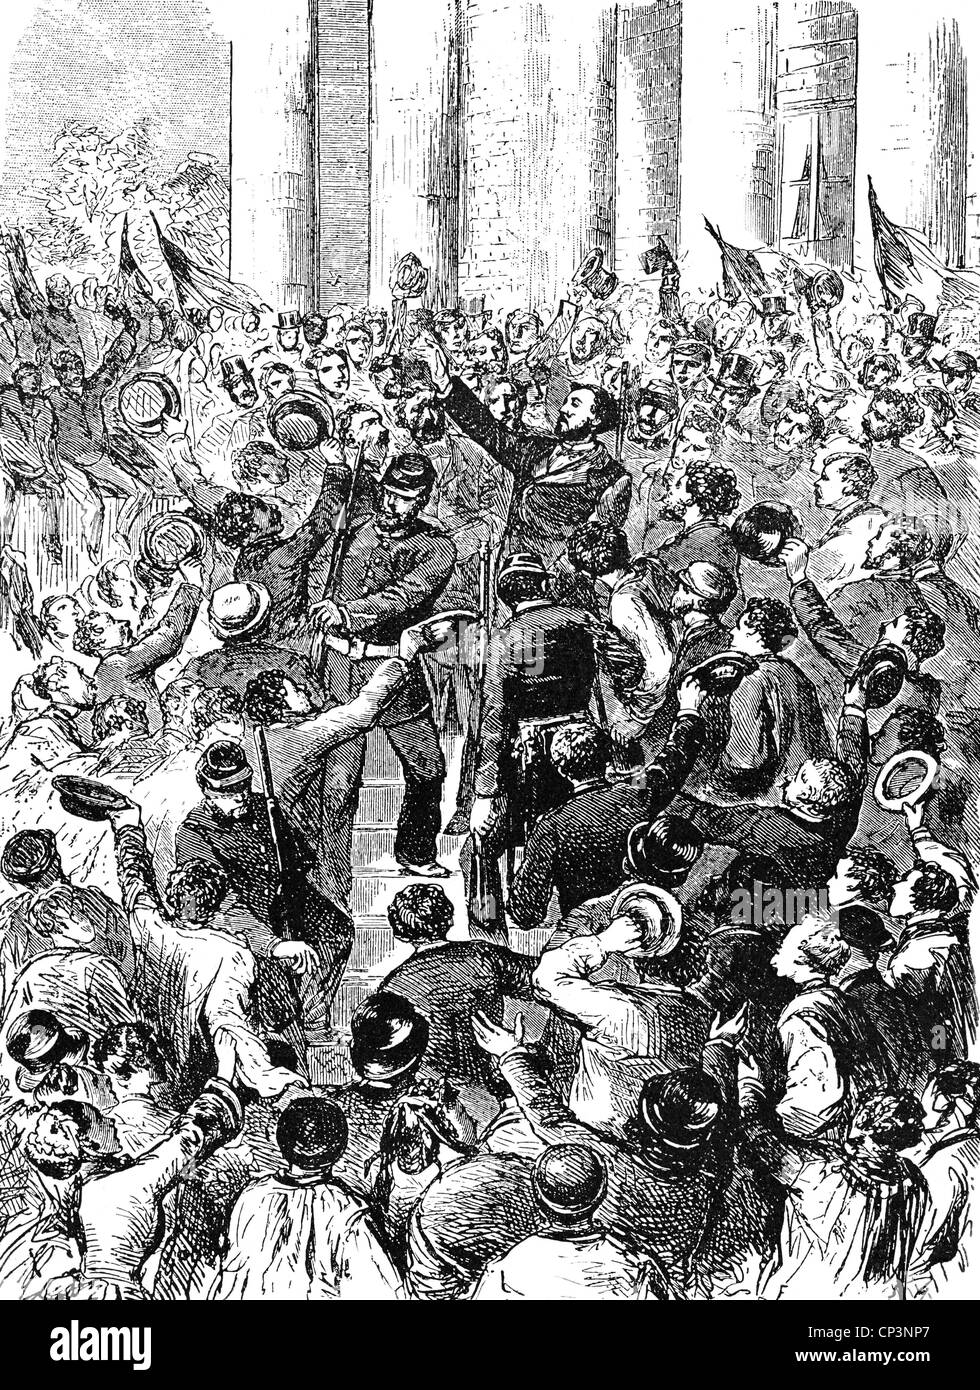 events, Franco-Prussian War 1870 - 1871, proclamation of the Third Republic by Leon Gambetta, Paris, 4.9.1870, wood engraving, 19th century, crowd, politician, fall of the Second Empire, France, Franco - Prussian, historic, historical, people, Additional-Rights-Clearences-Not Available Stock Photo